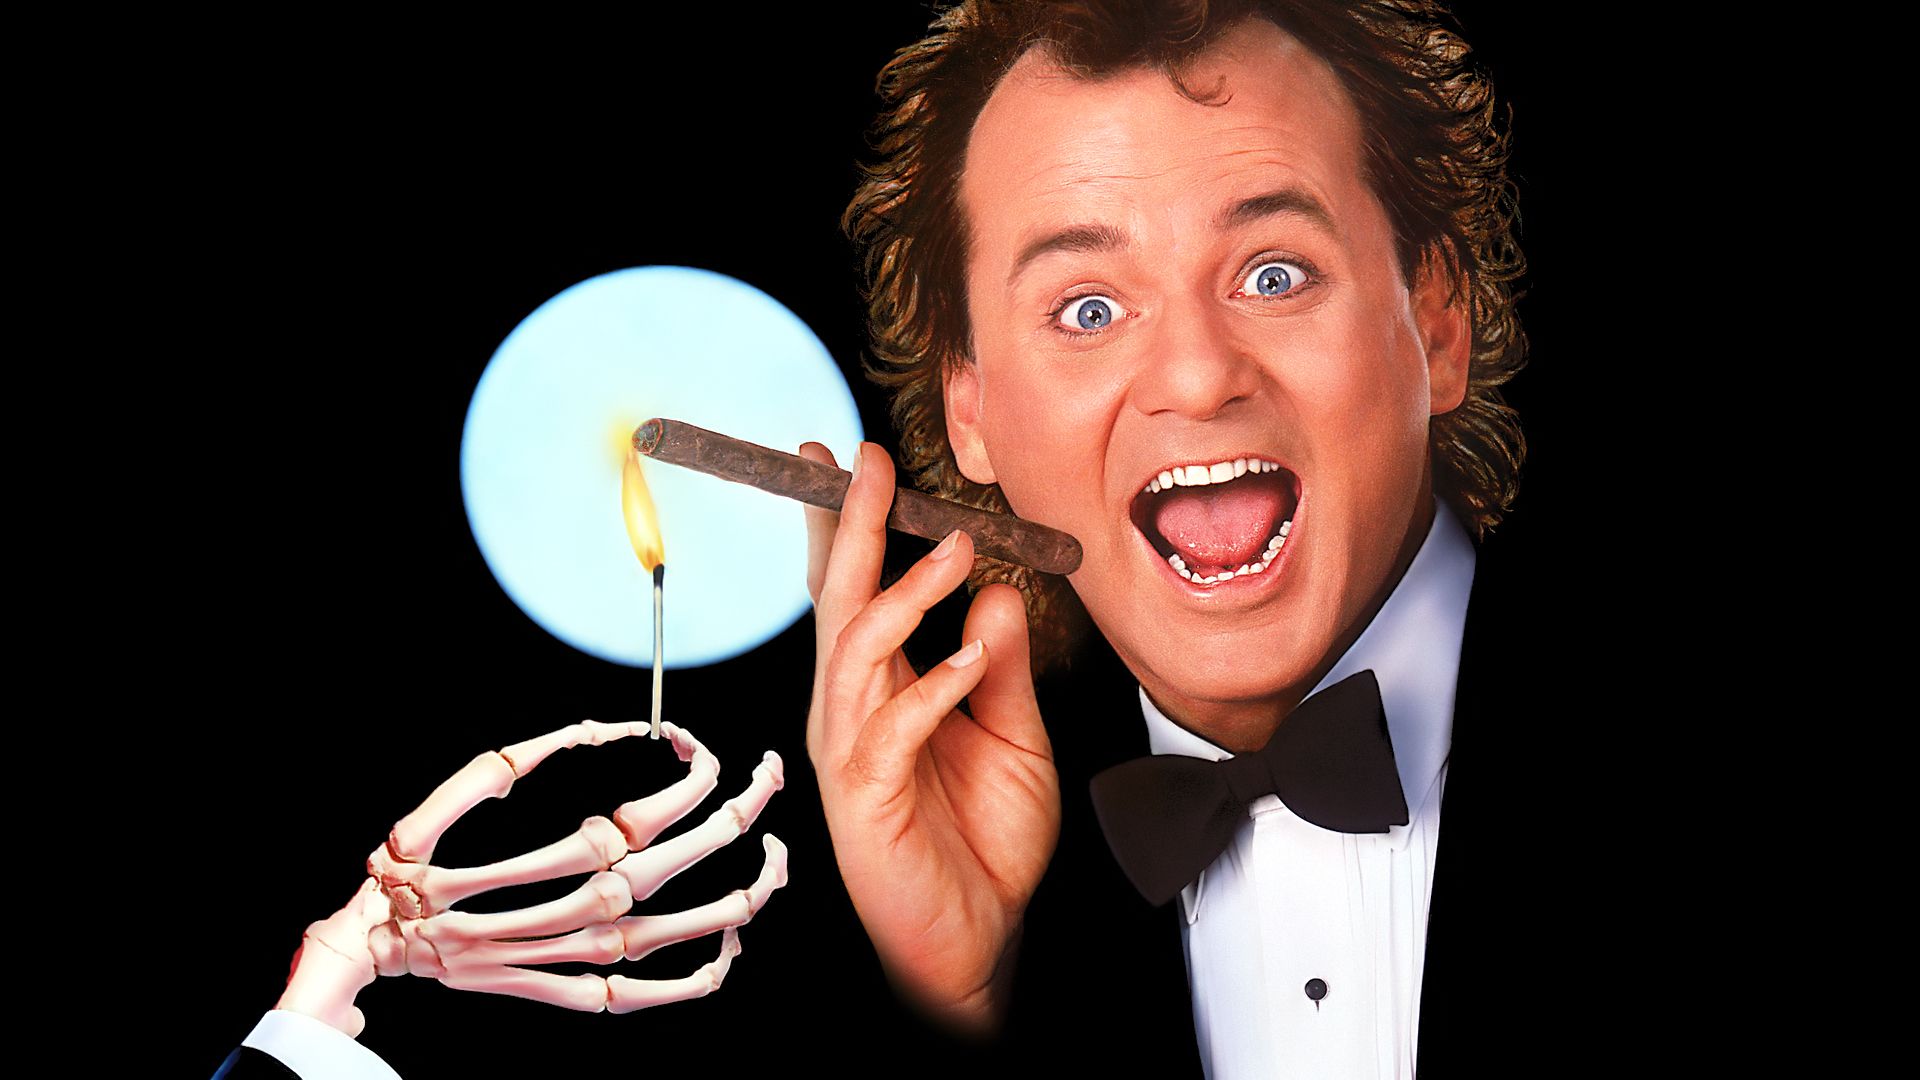 Scrooged background